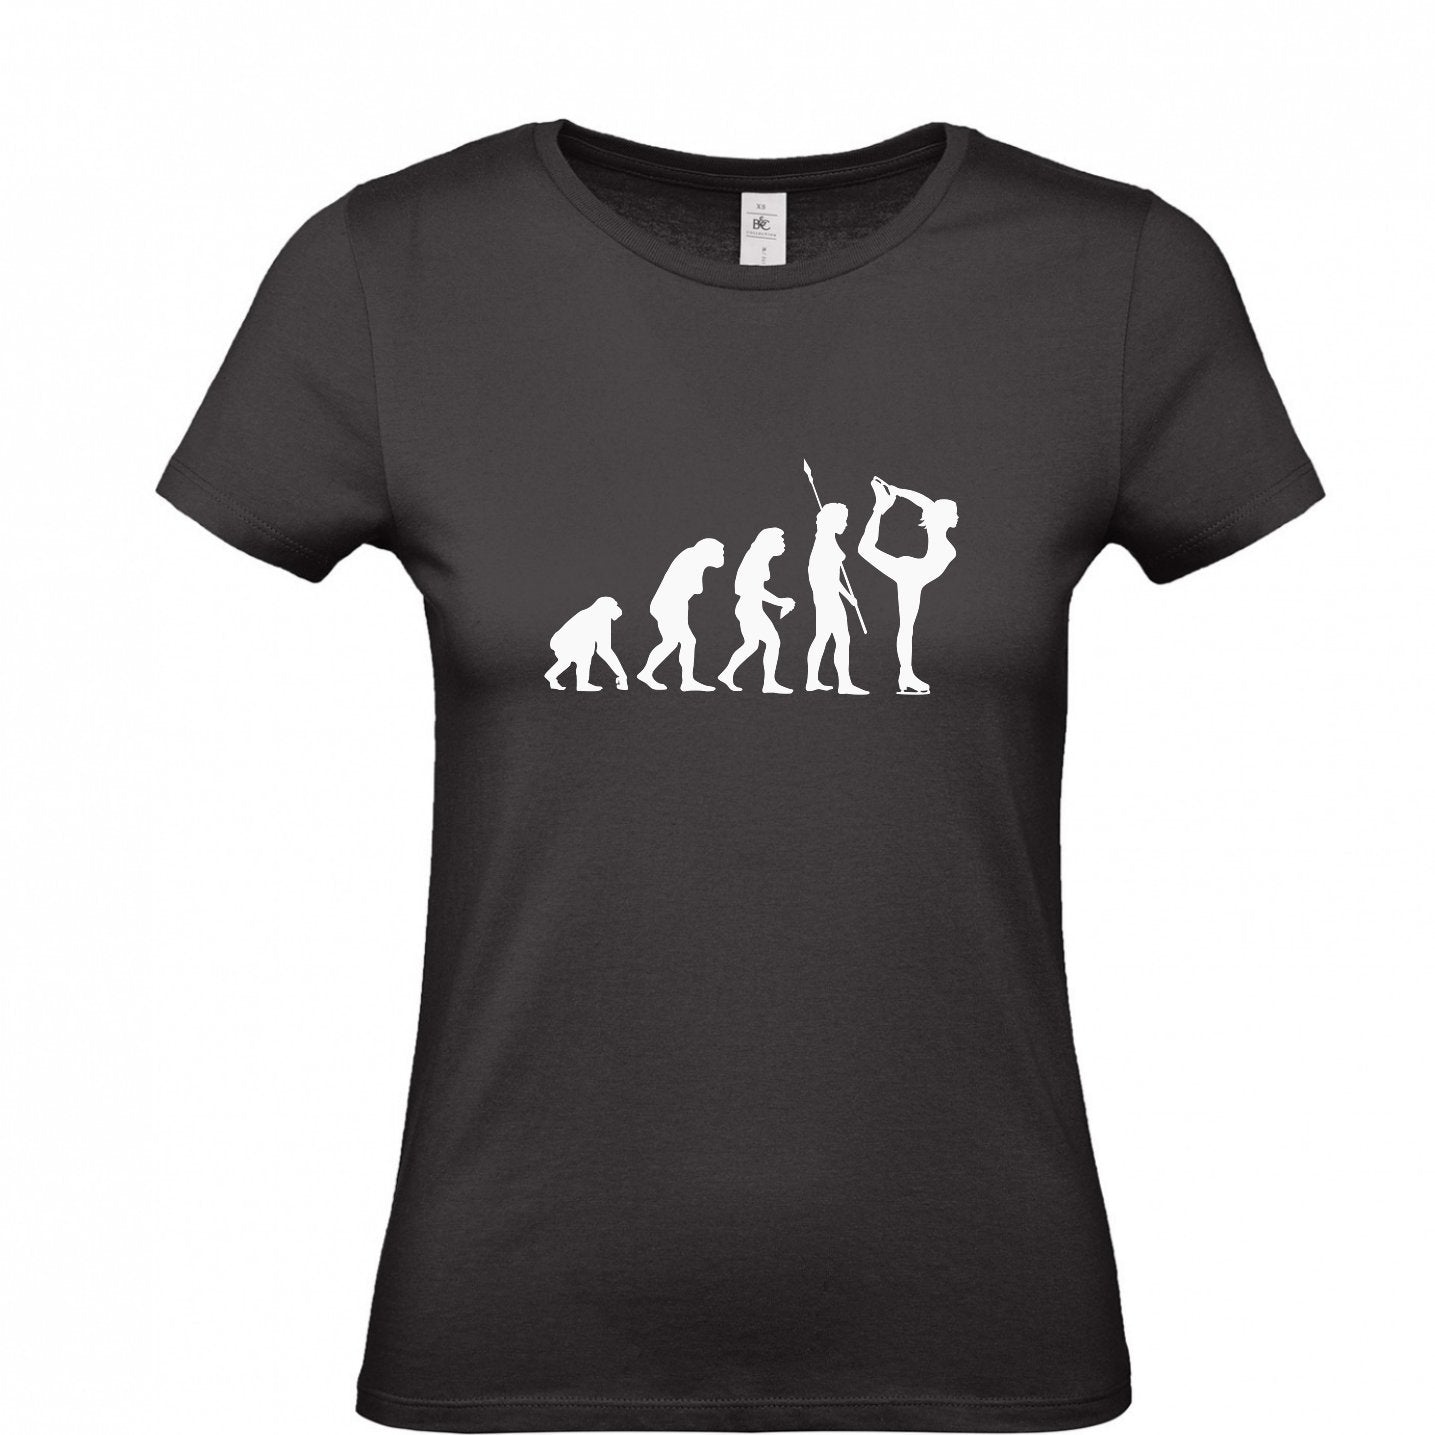 Evolution of ICE skating T-Shirt for Teens/Adults - Scarf Monkey